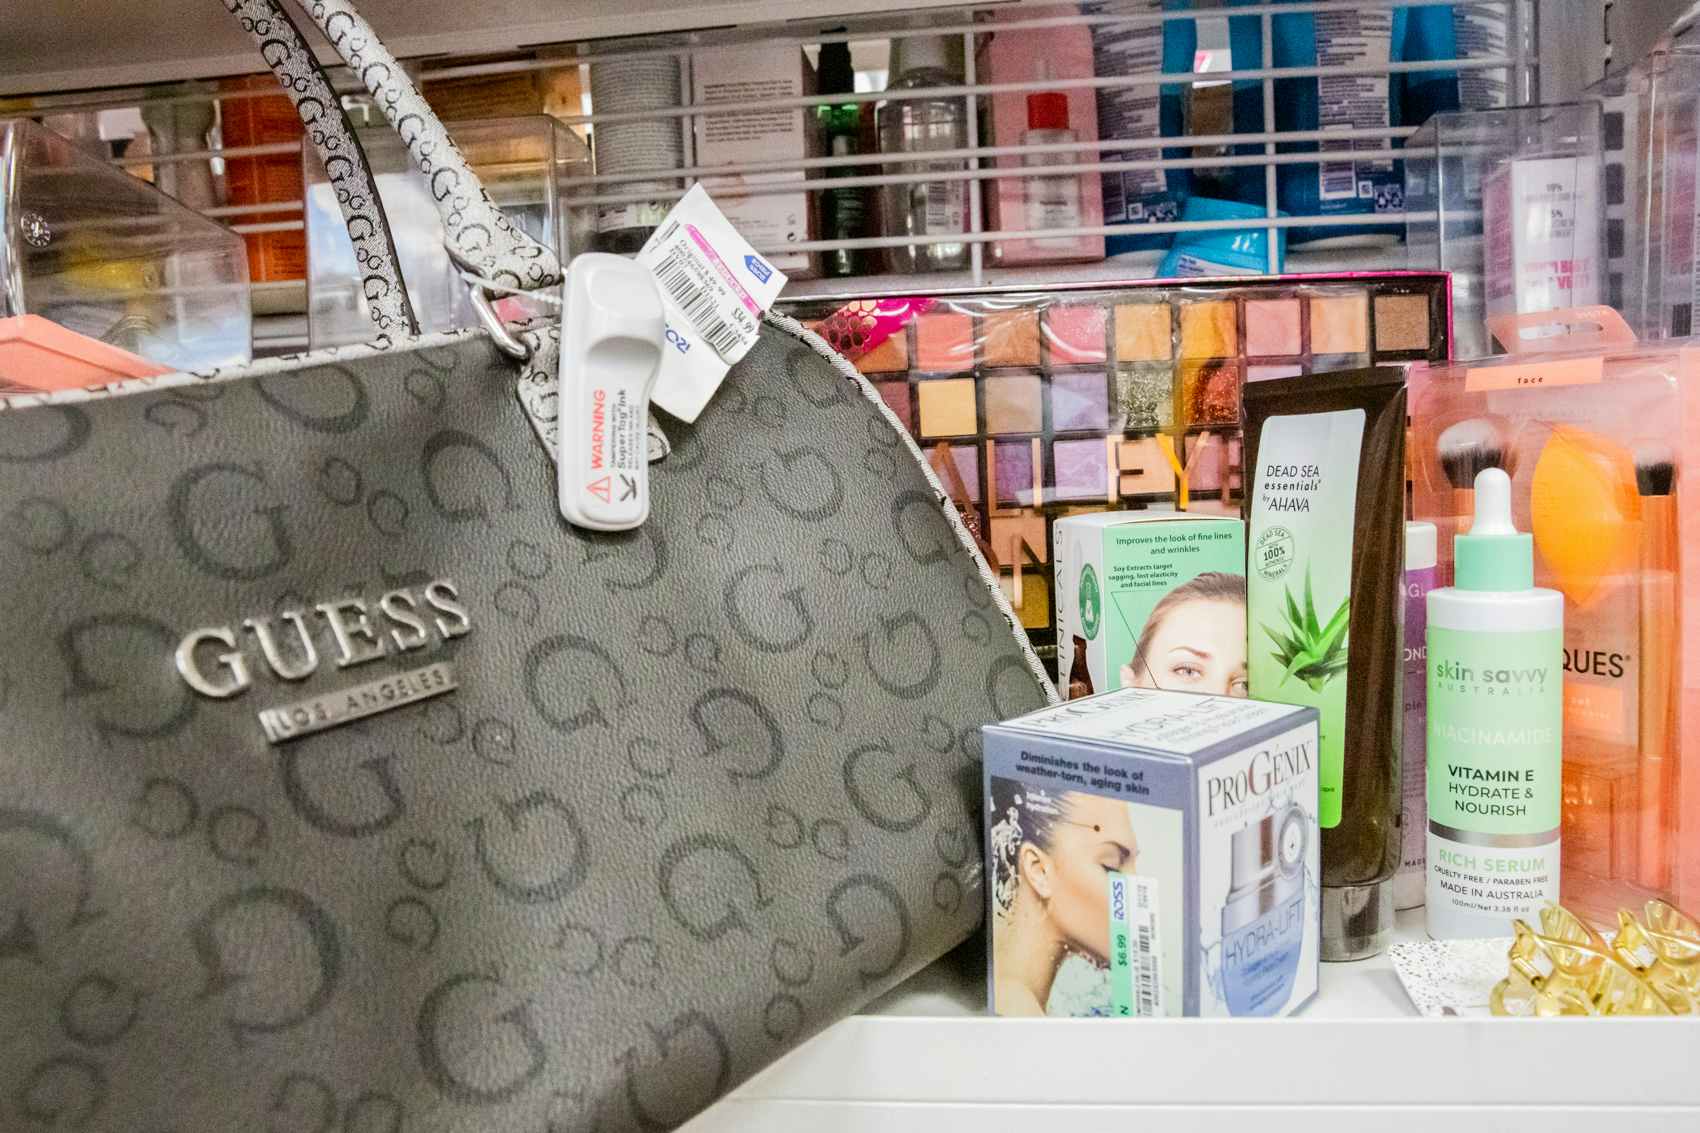 Guess Handbag with an assortment of beauty and hair care products